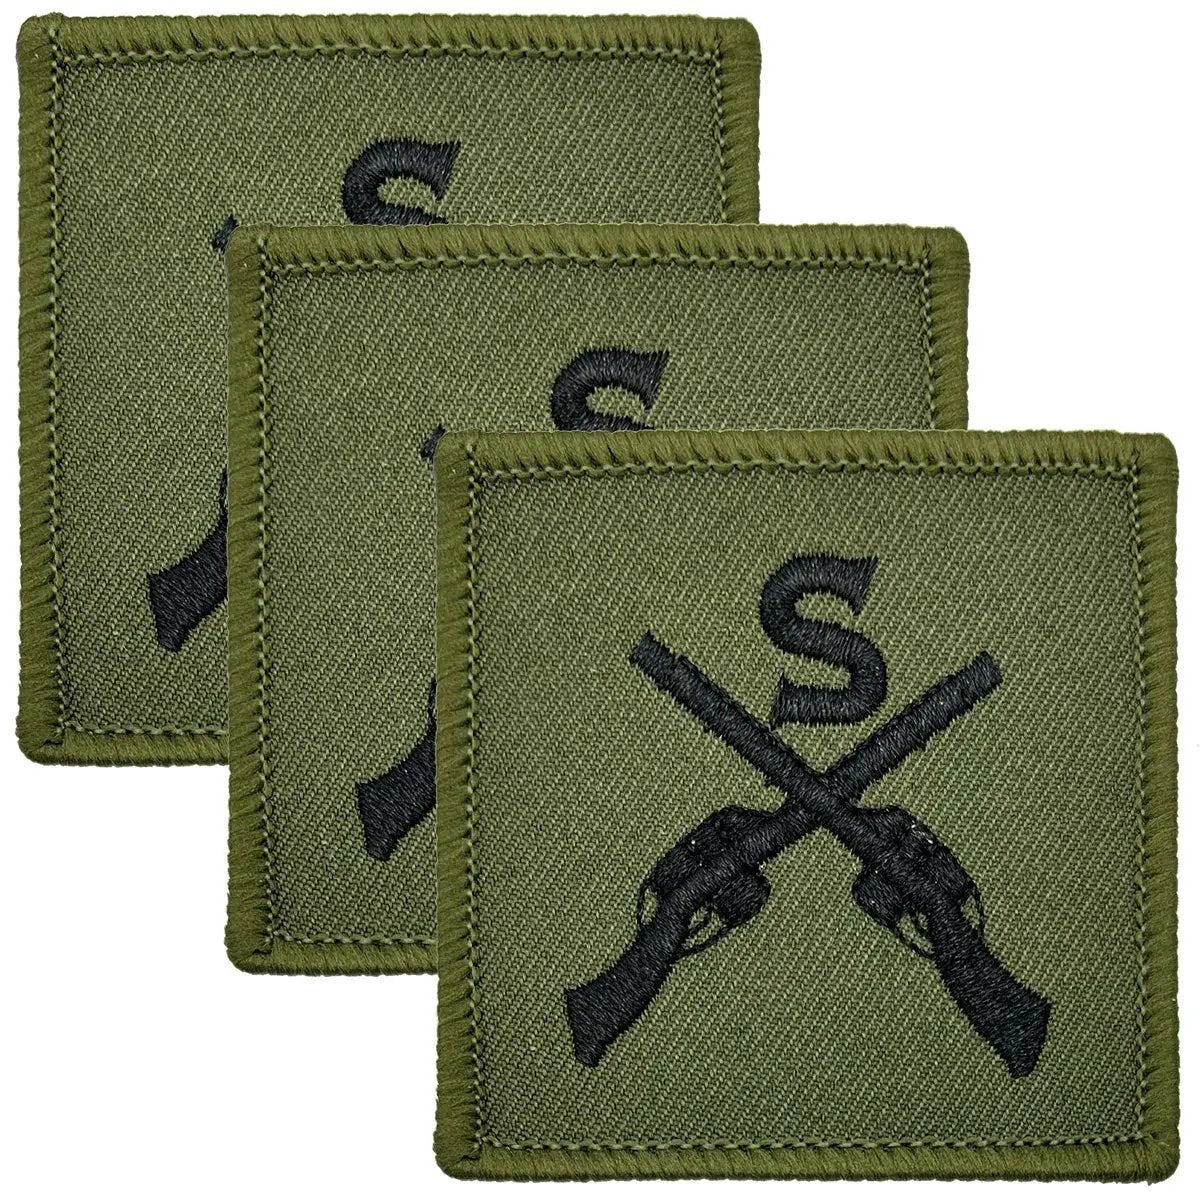 Sniper Trade TRF - Iron or Sewn On Patch - John Bull Clothing